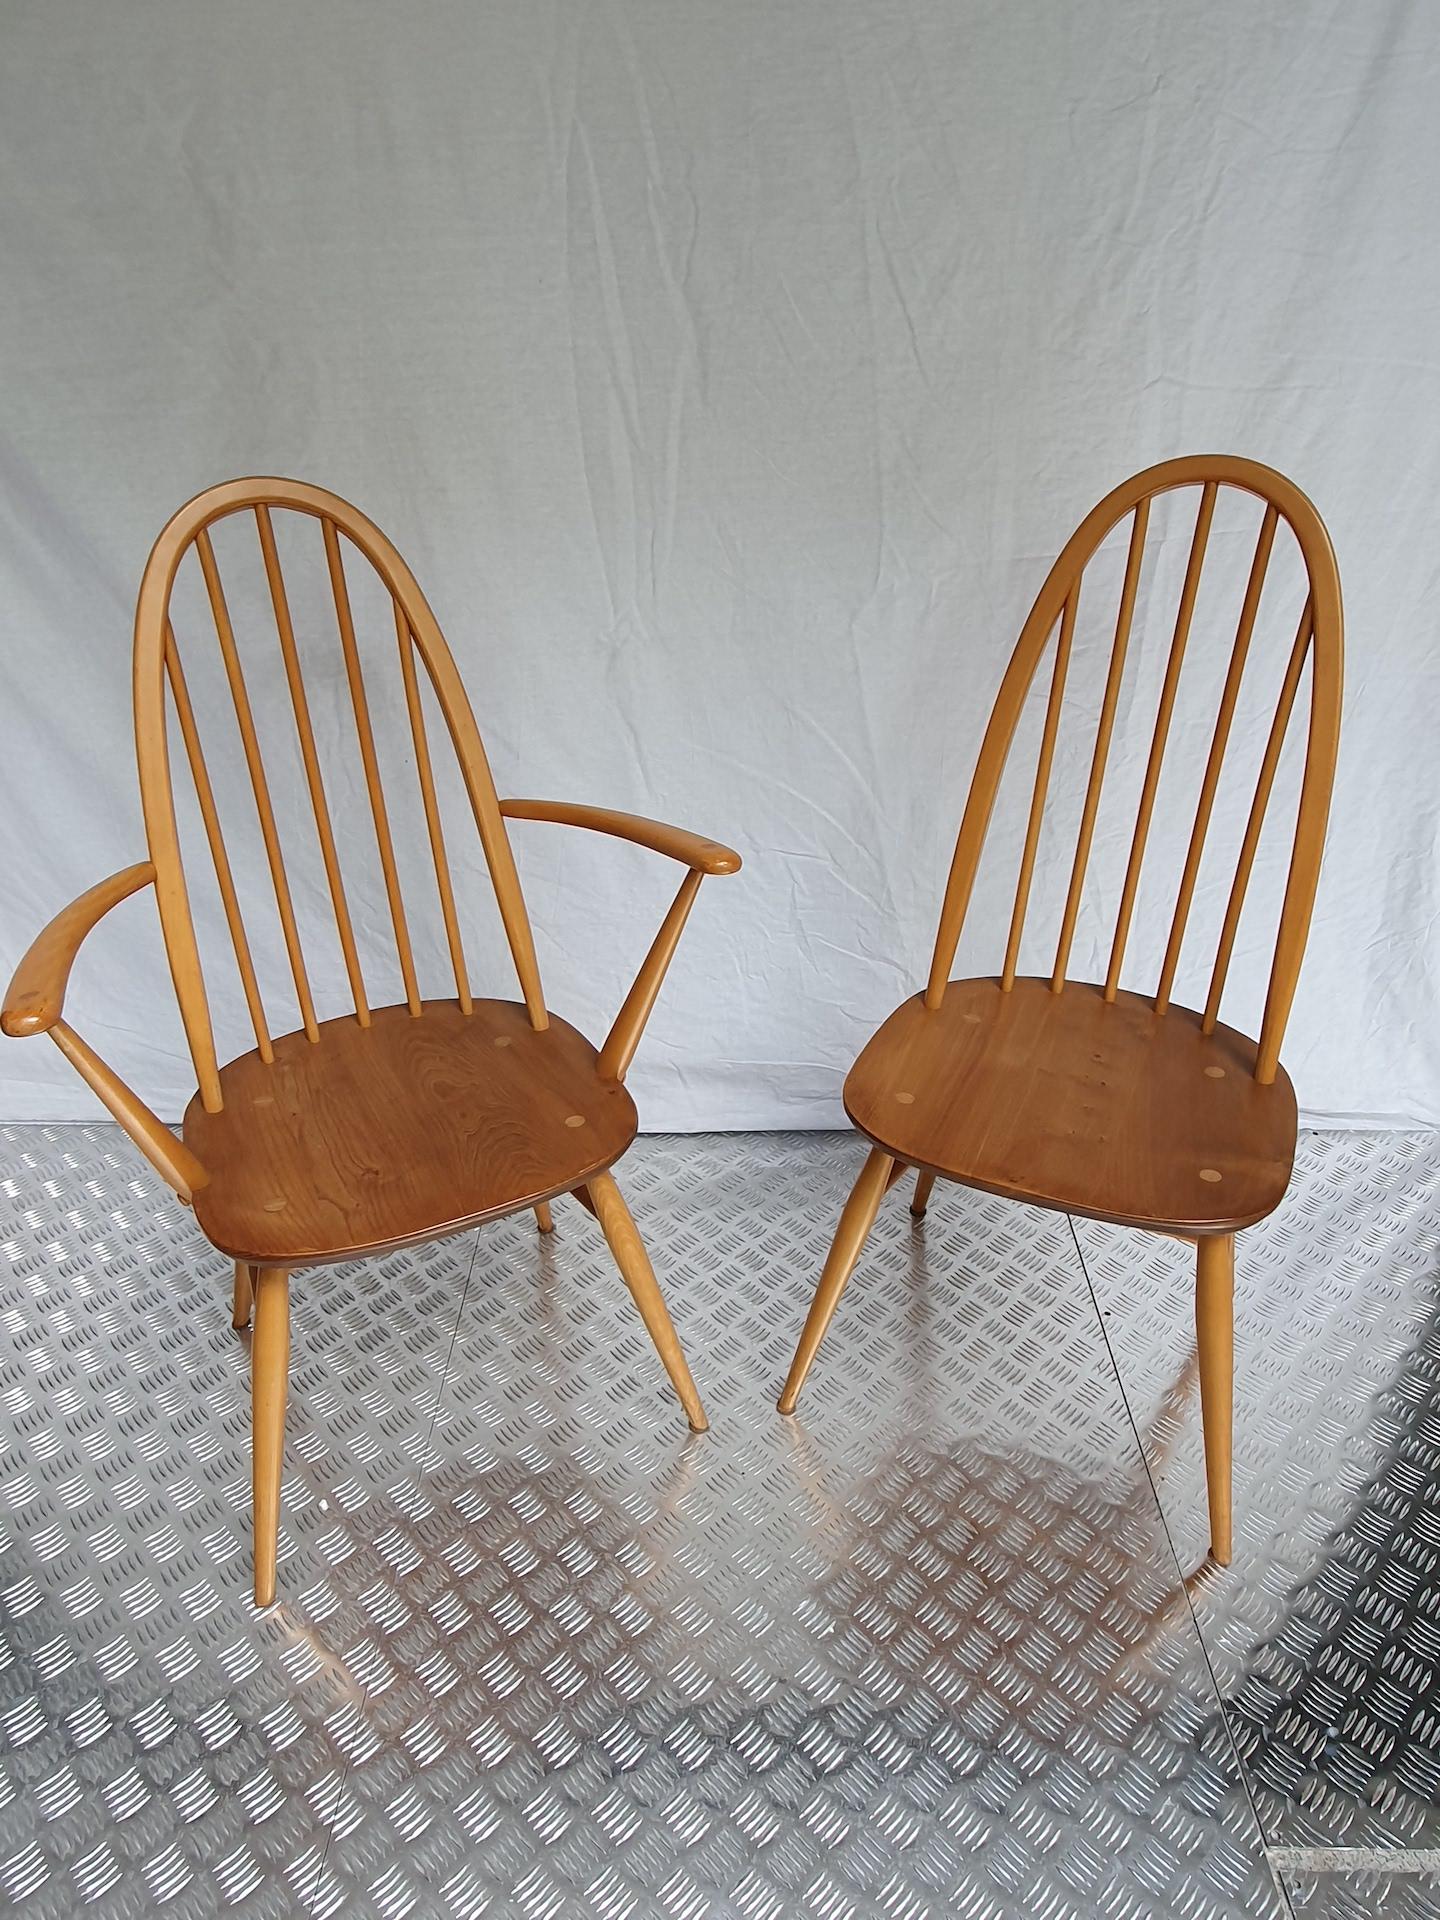 Pair of Armchair and Windsor chair by Lucian Randolph Ercolani 
Ercol Edition
circa 1960
Elm and beech
Measures: 97 x 42 x 41 cm
In very good condition.